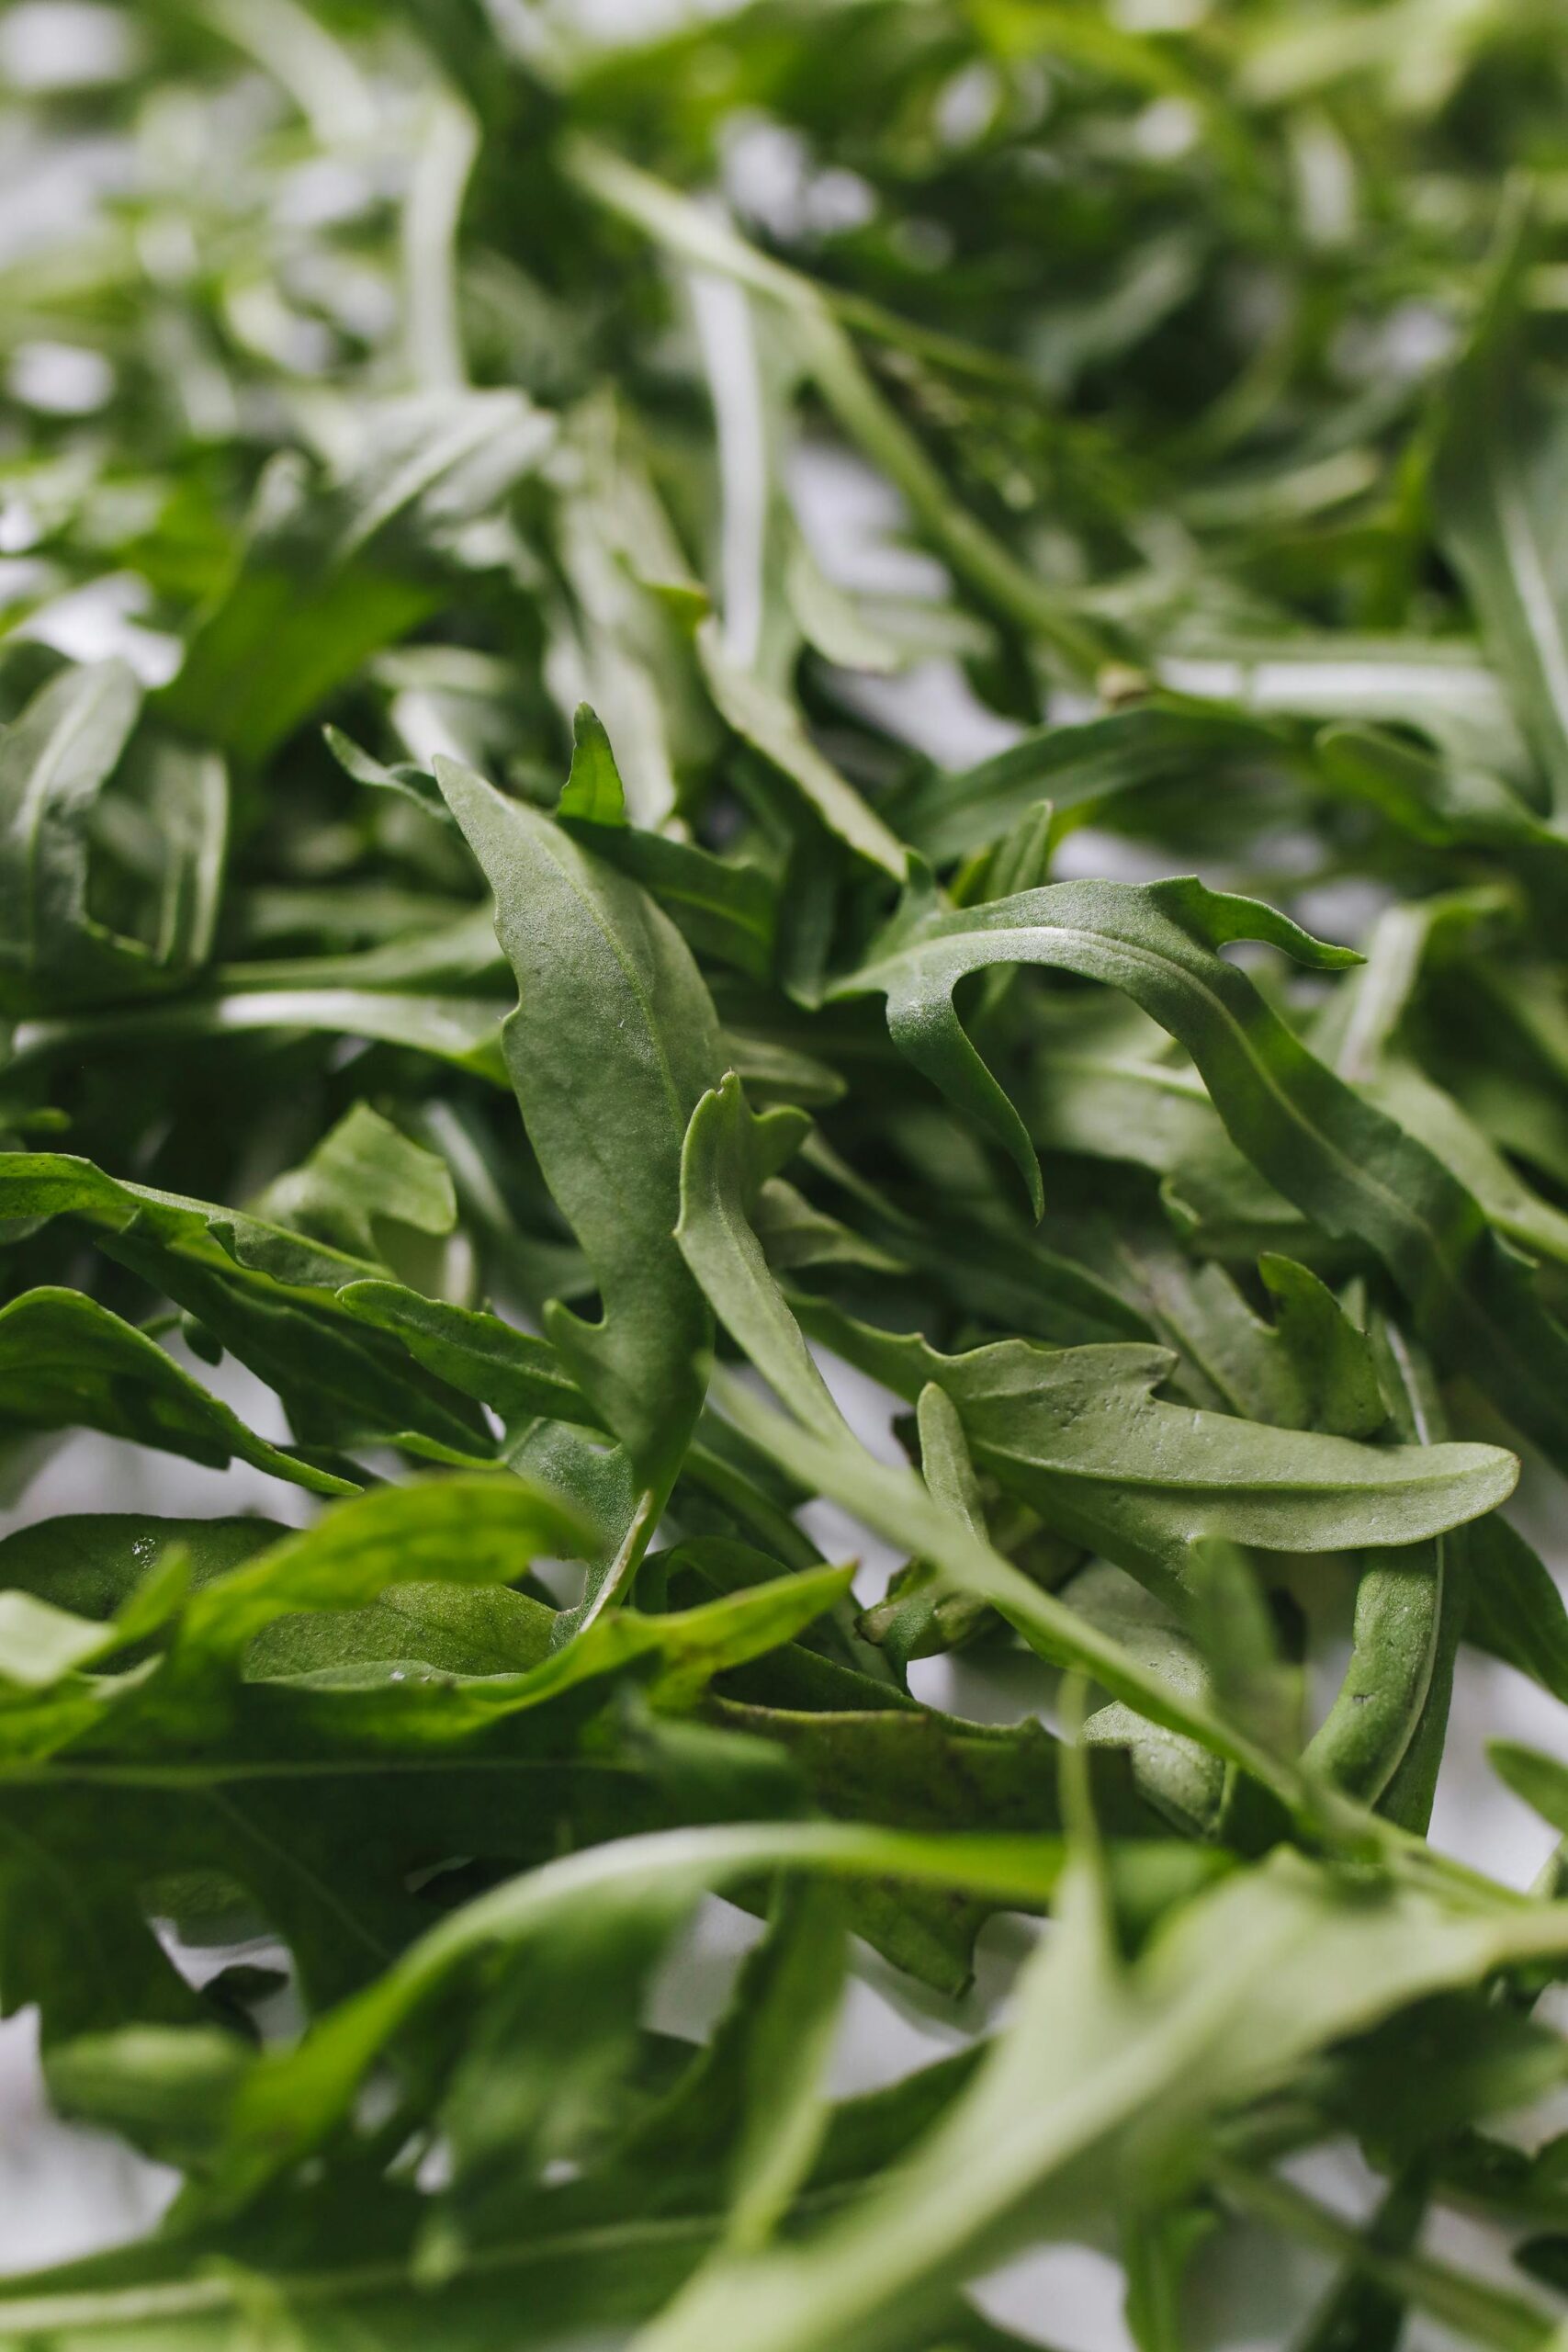 Companion Plants for Arugula: Boost Growth and Flavor